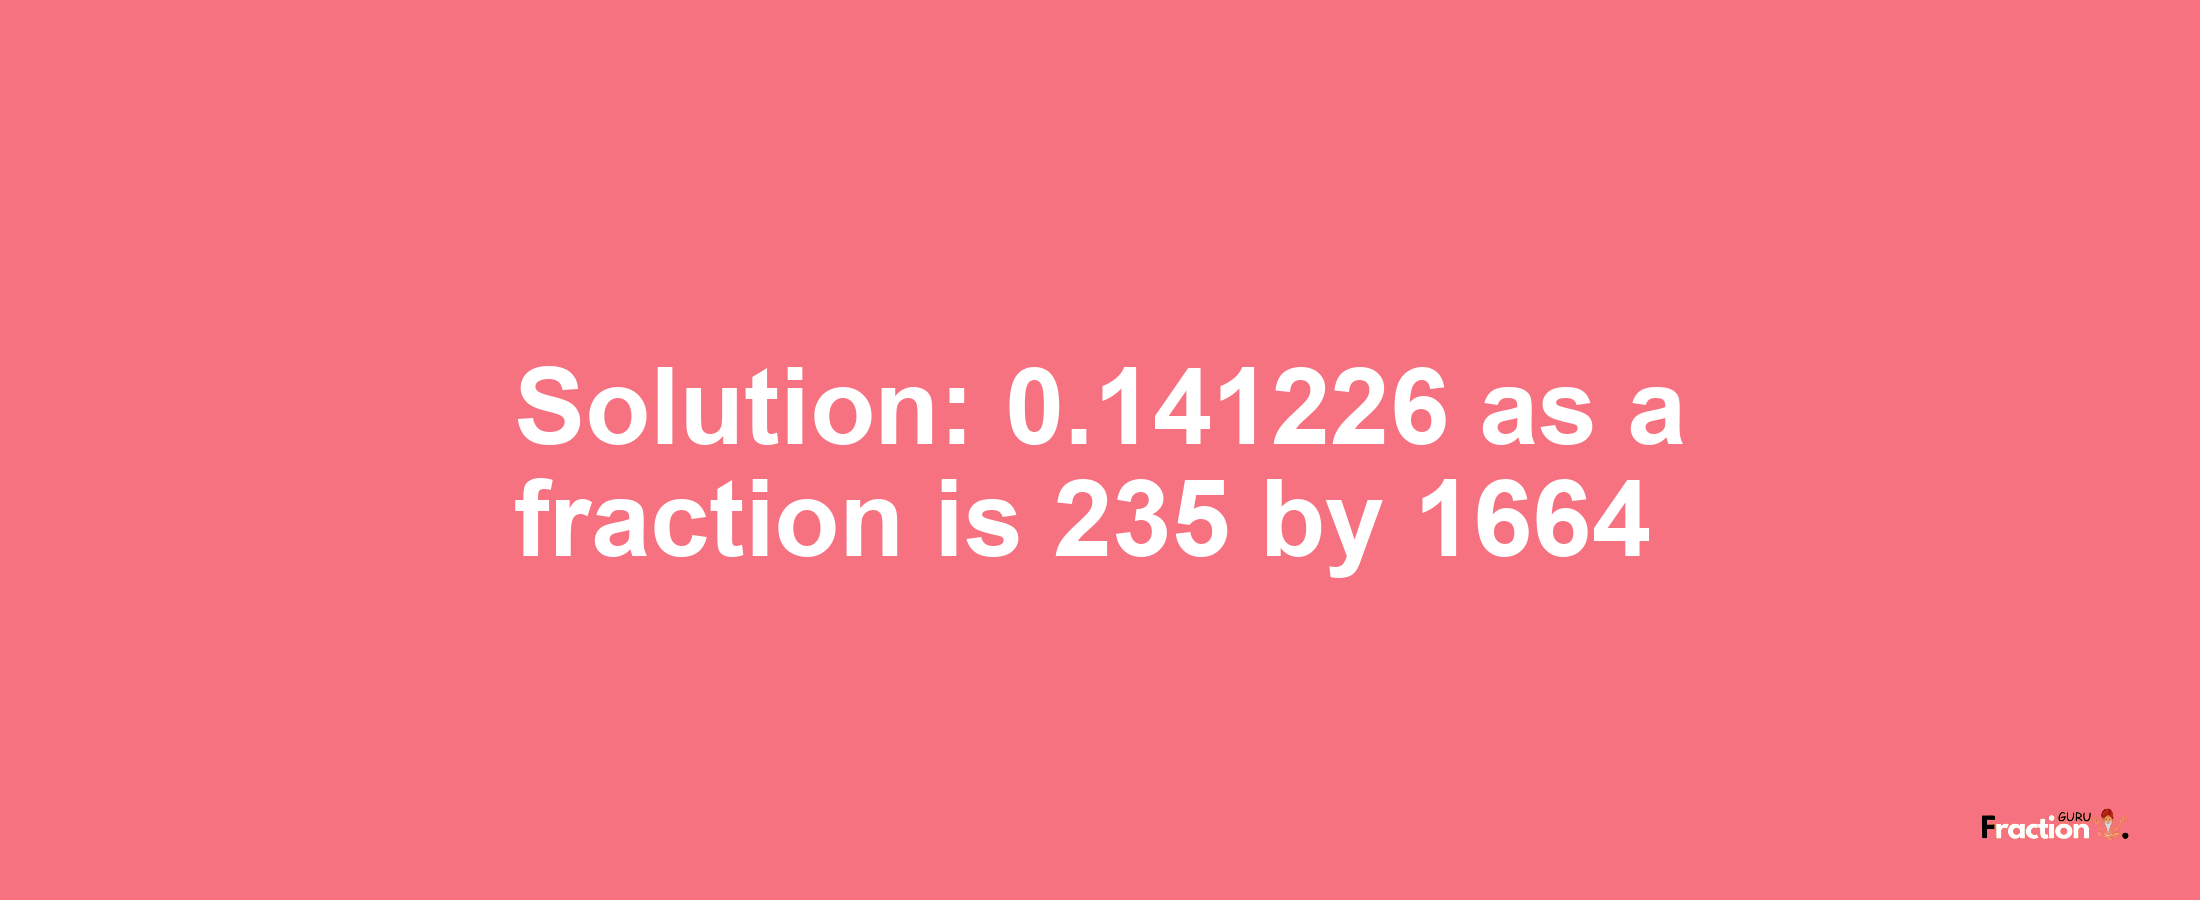 Solution:0.141226 as a fraction is 235/1664